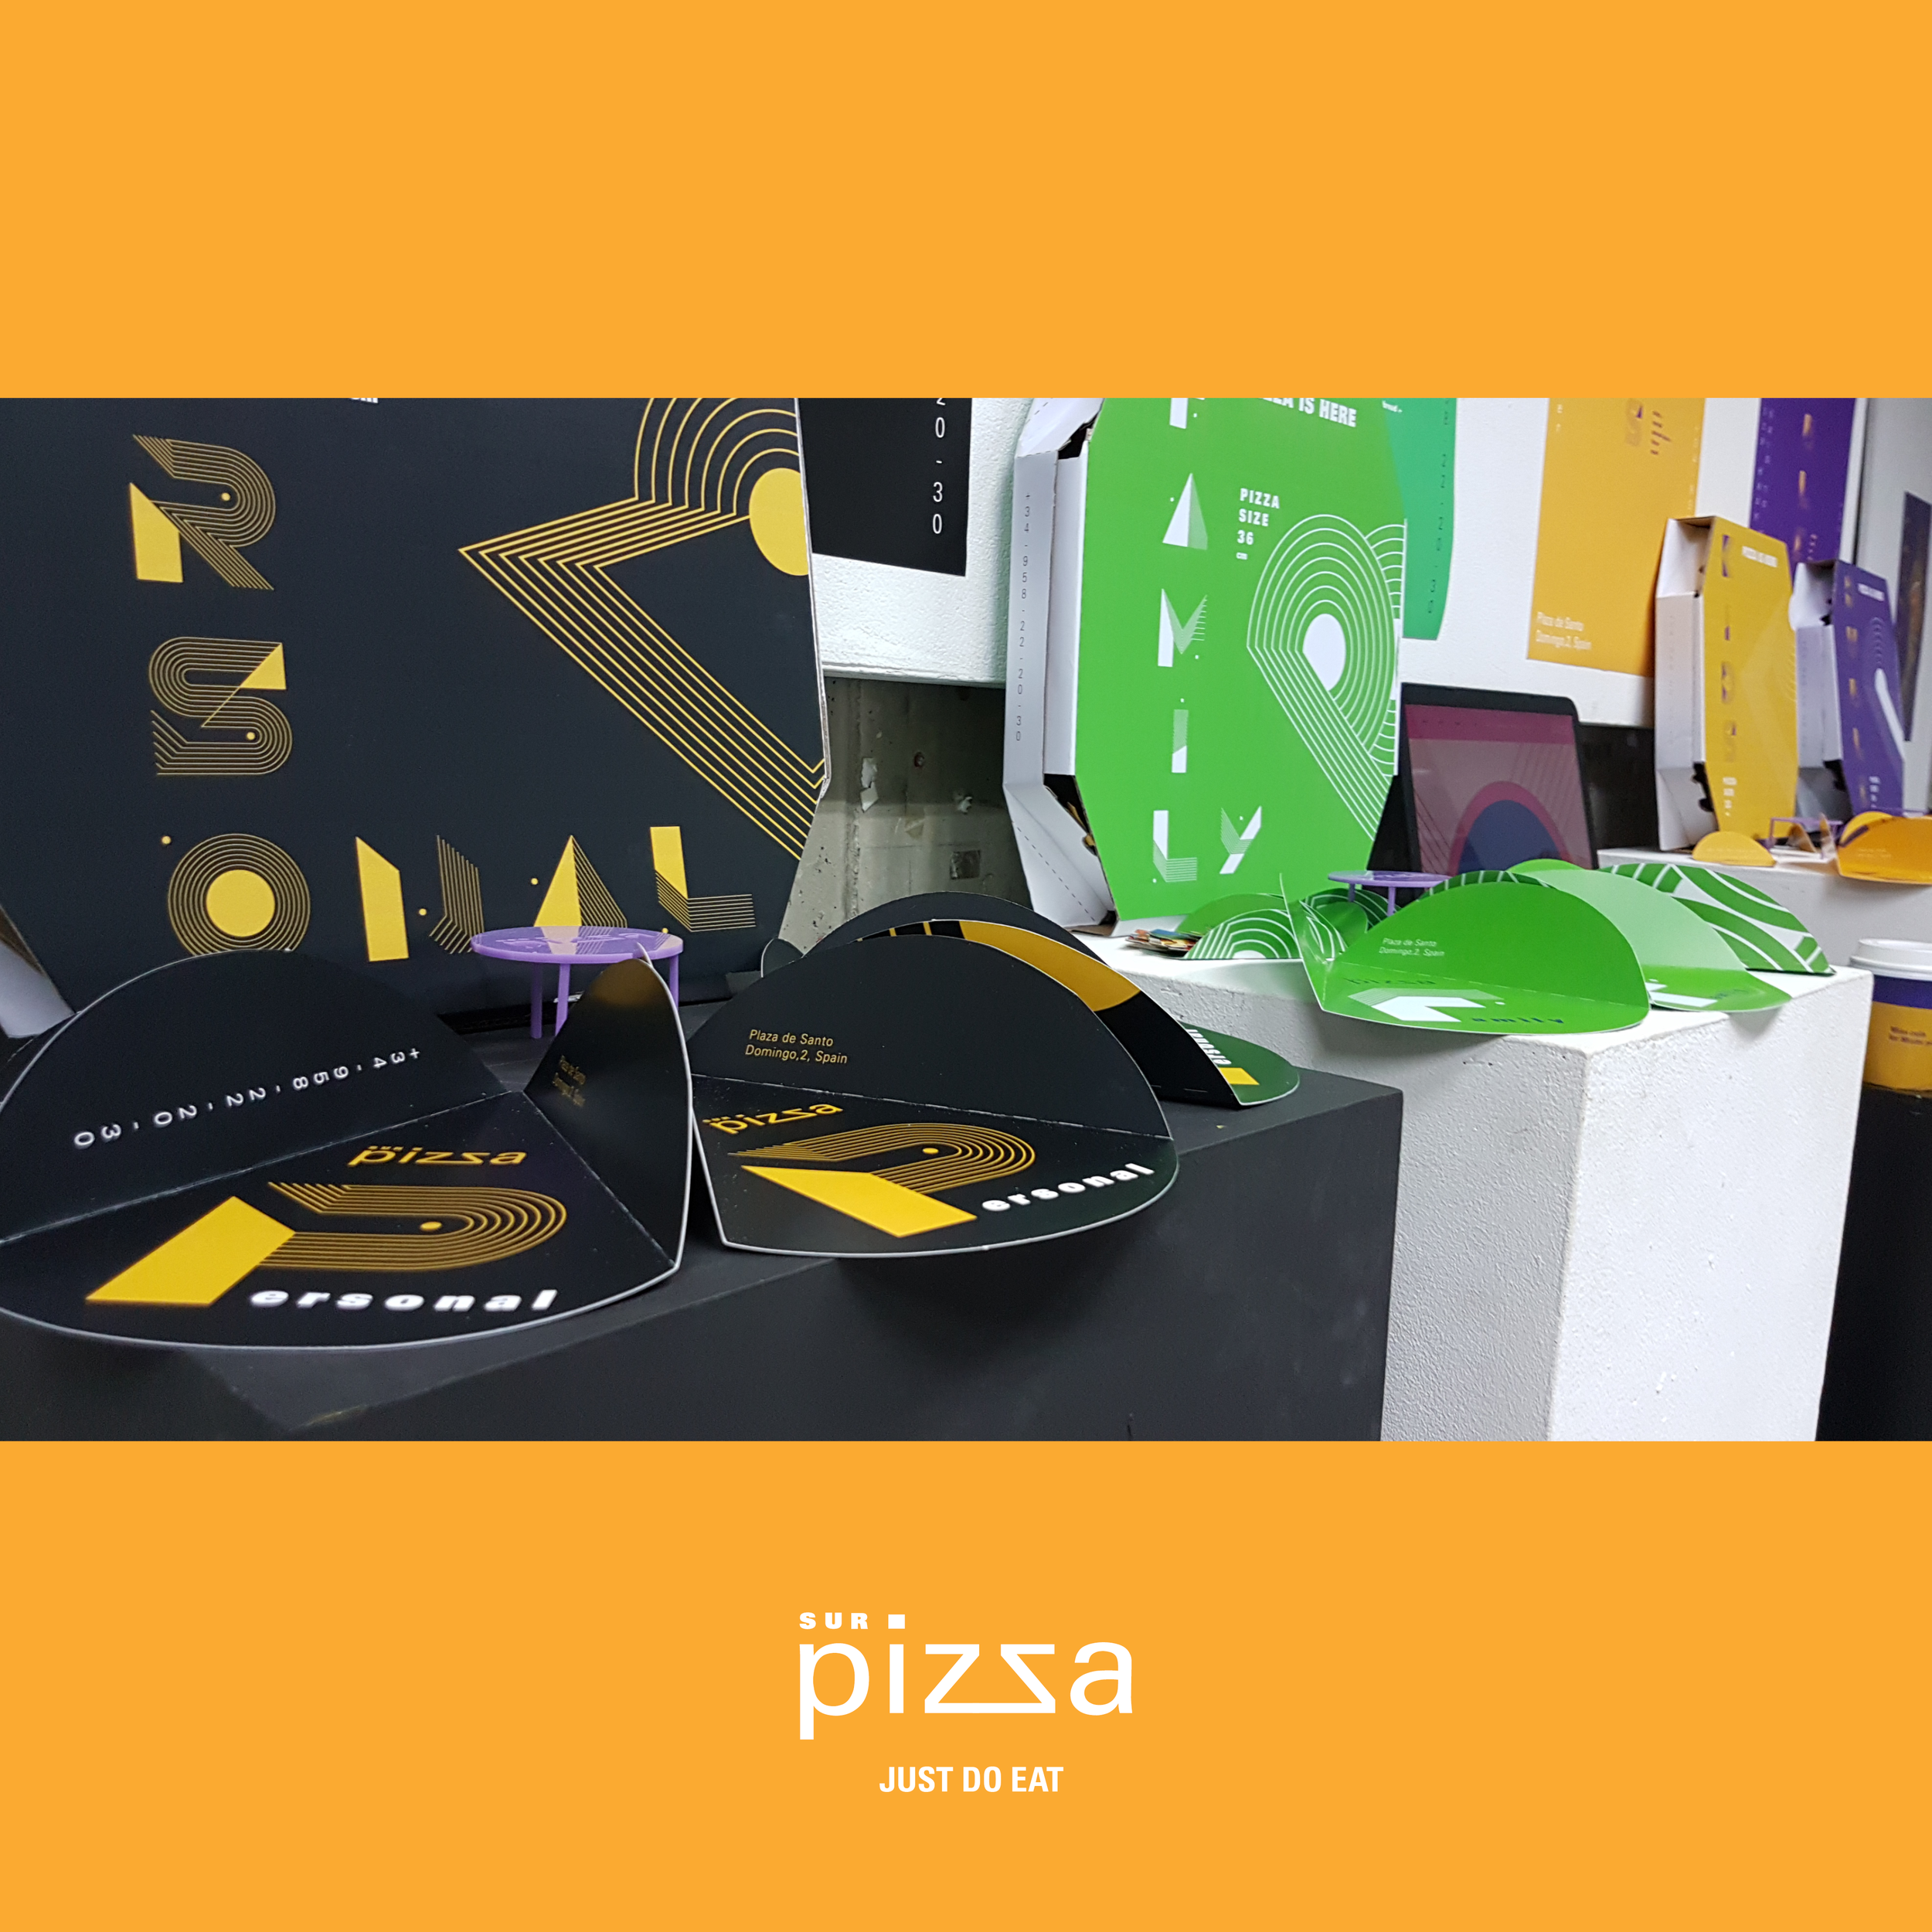 Student Concept for Pizza Brand and Packaging Design